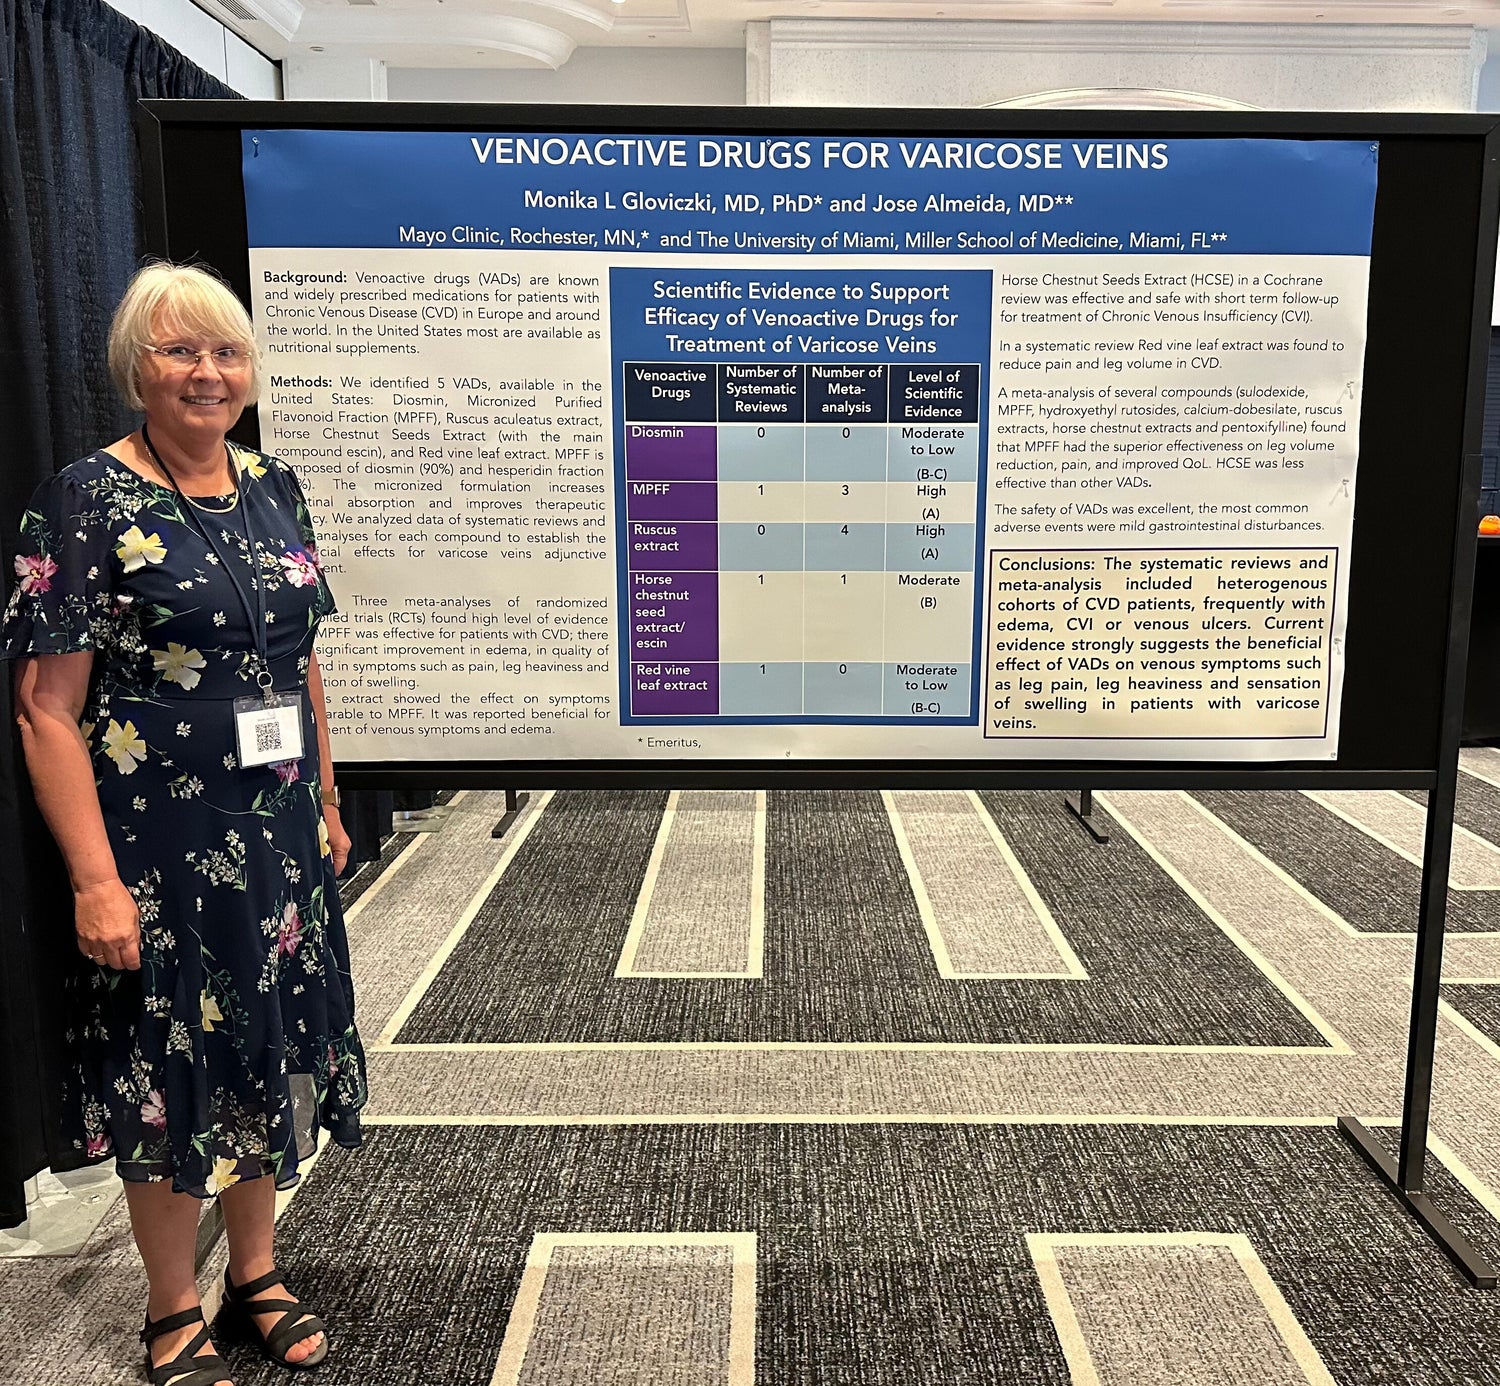 meeting for venoactive drugs for varicose veins